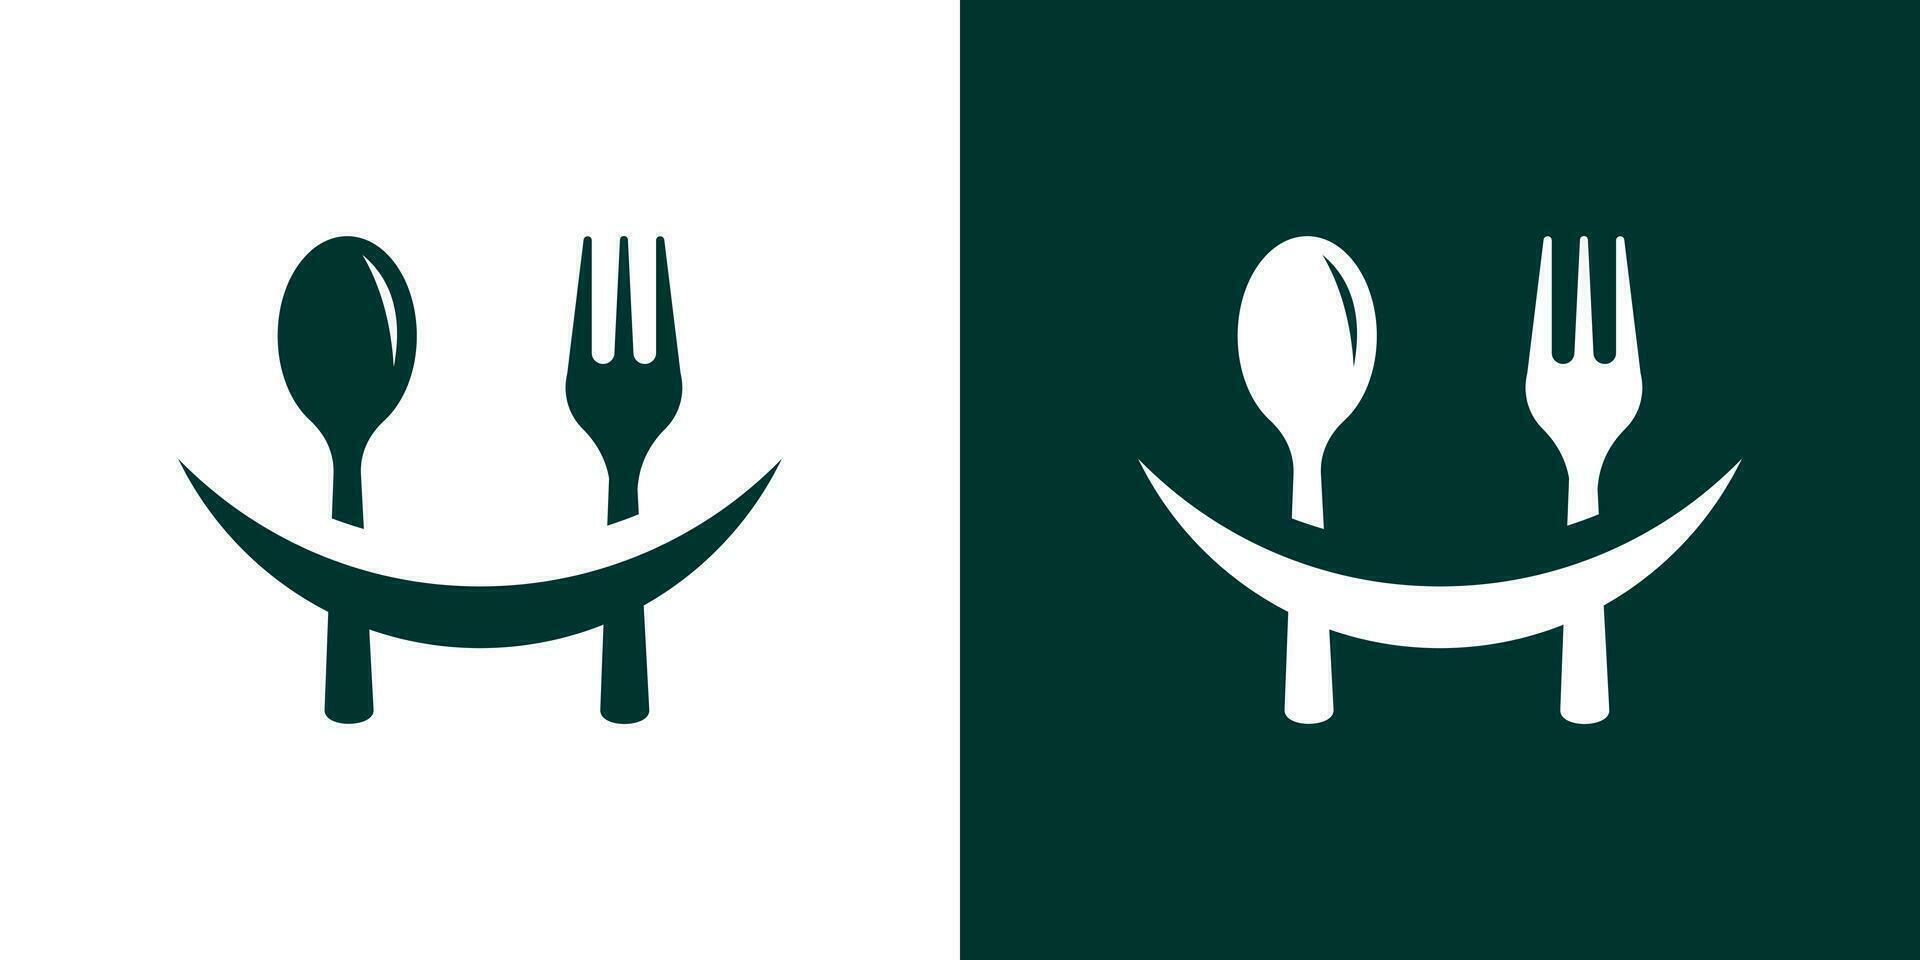 logo design combining a smile with a spoon and fork for food design. vector